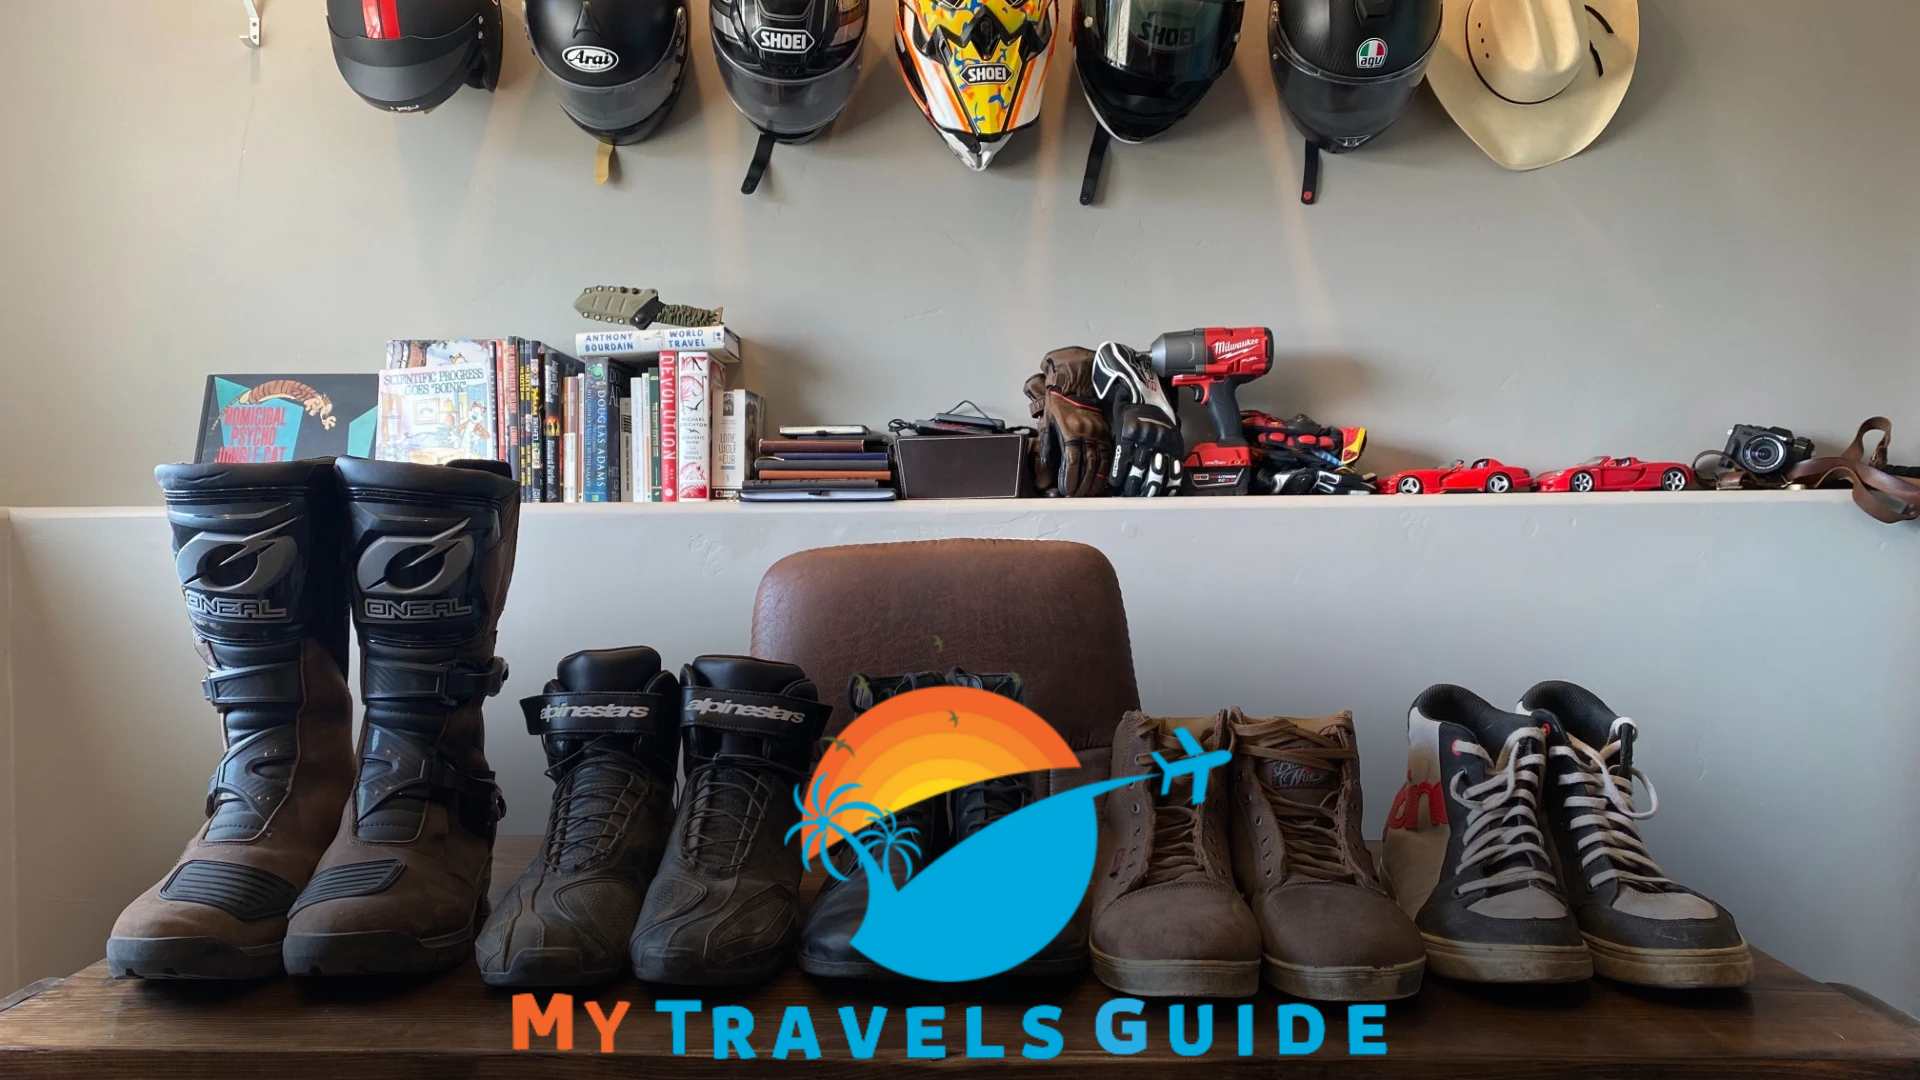 Cowboy Boots for Riding Motorcycles: Finding the Right Fit